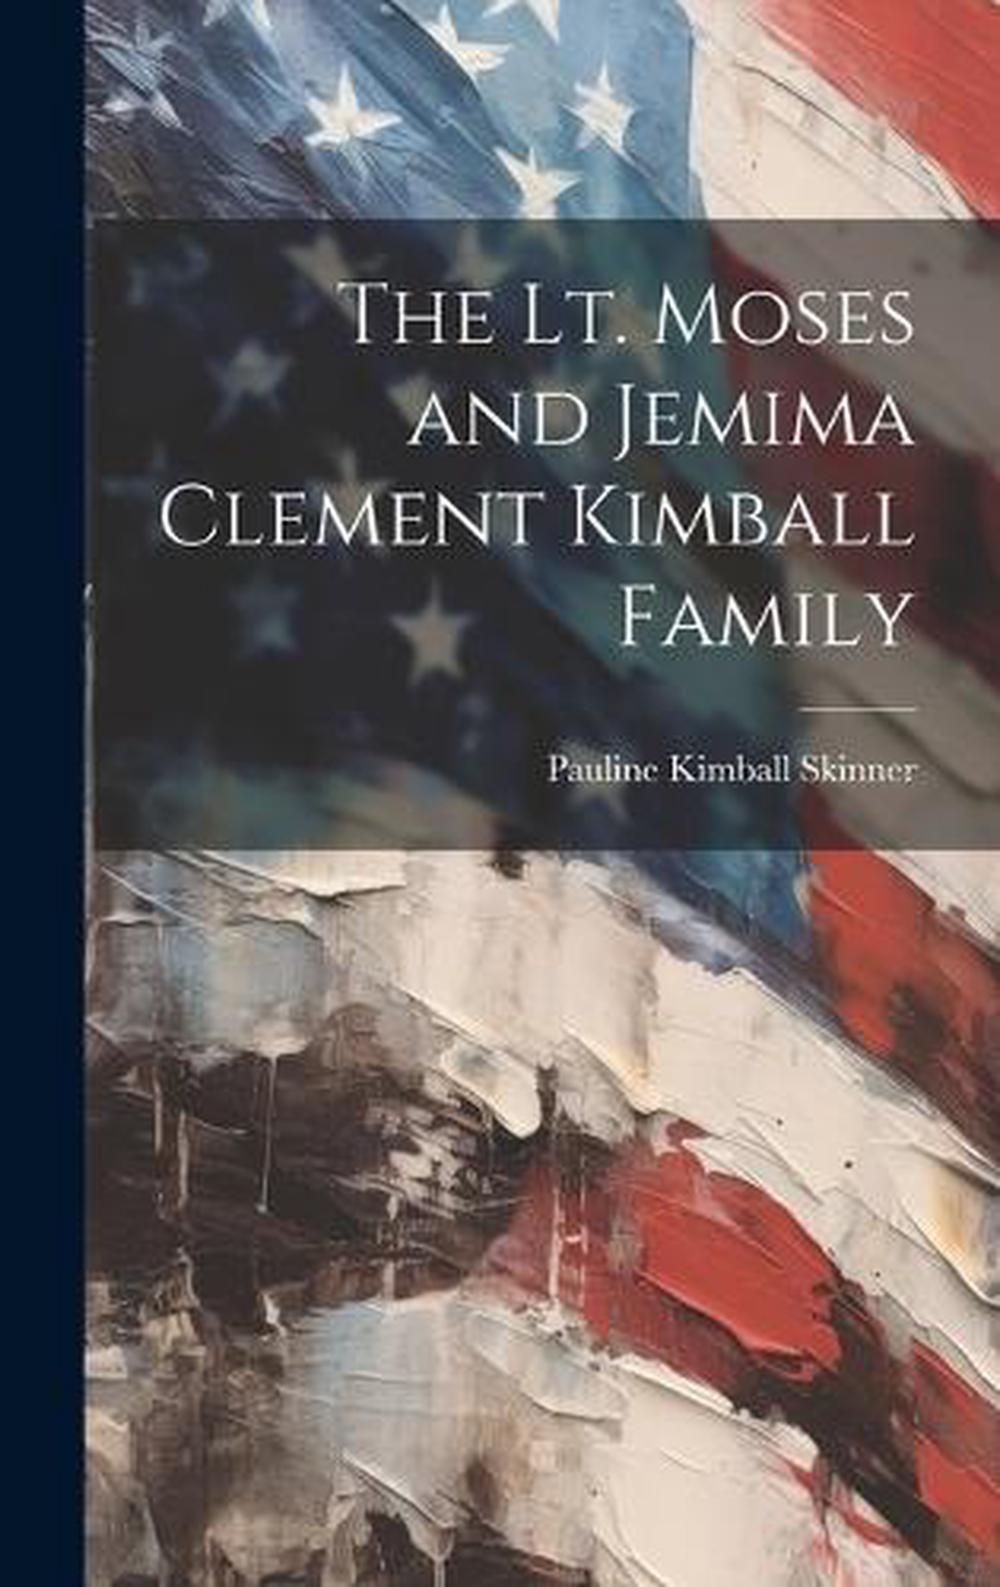 The Lt. Moses and Jemima Clement Kimball Family by Pauline Kimball 1897-1978 Ski